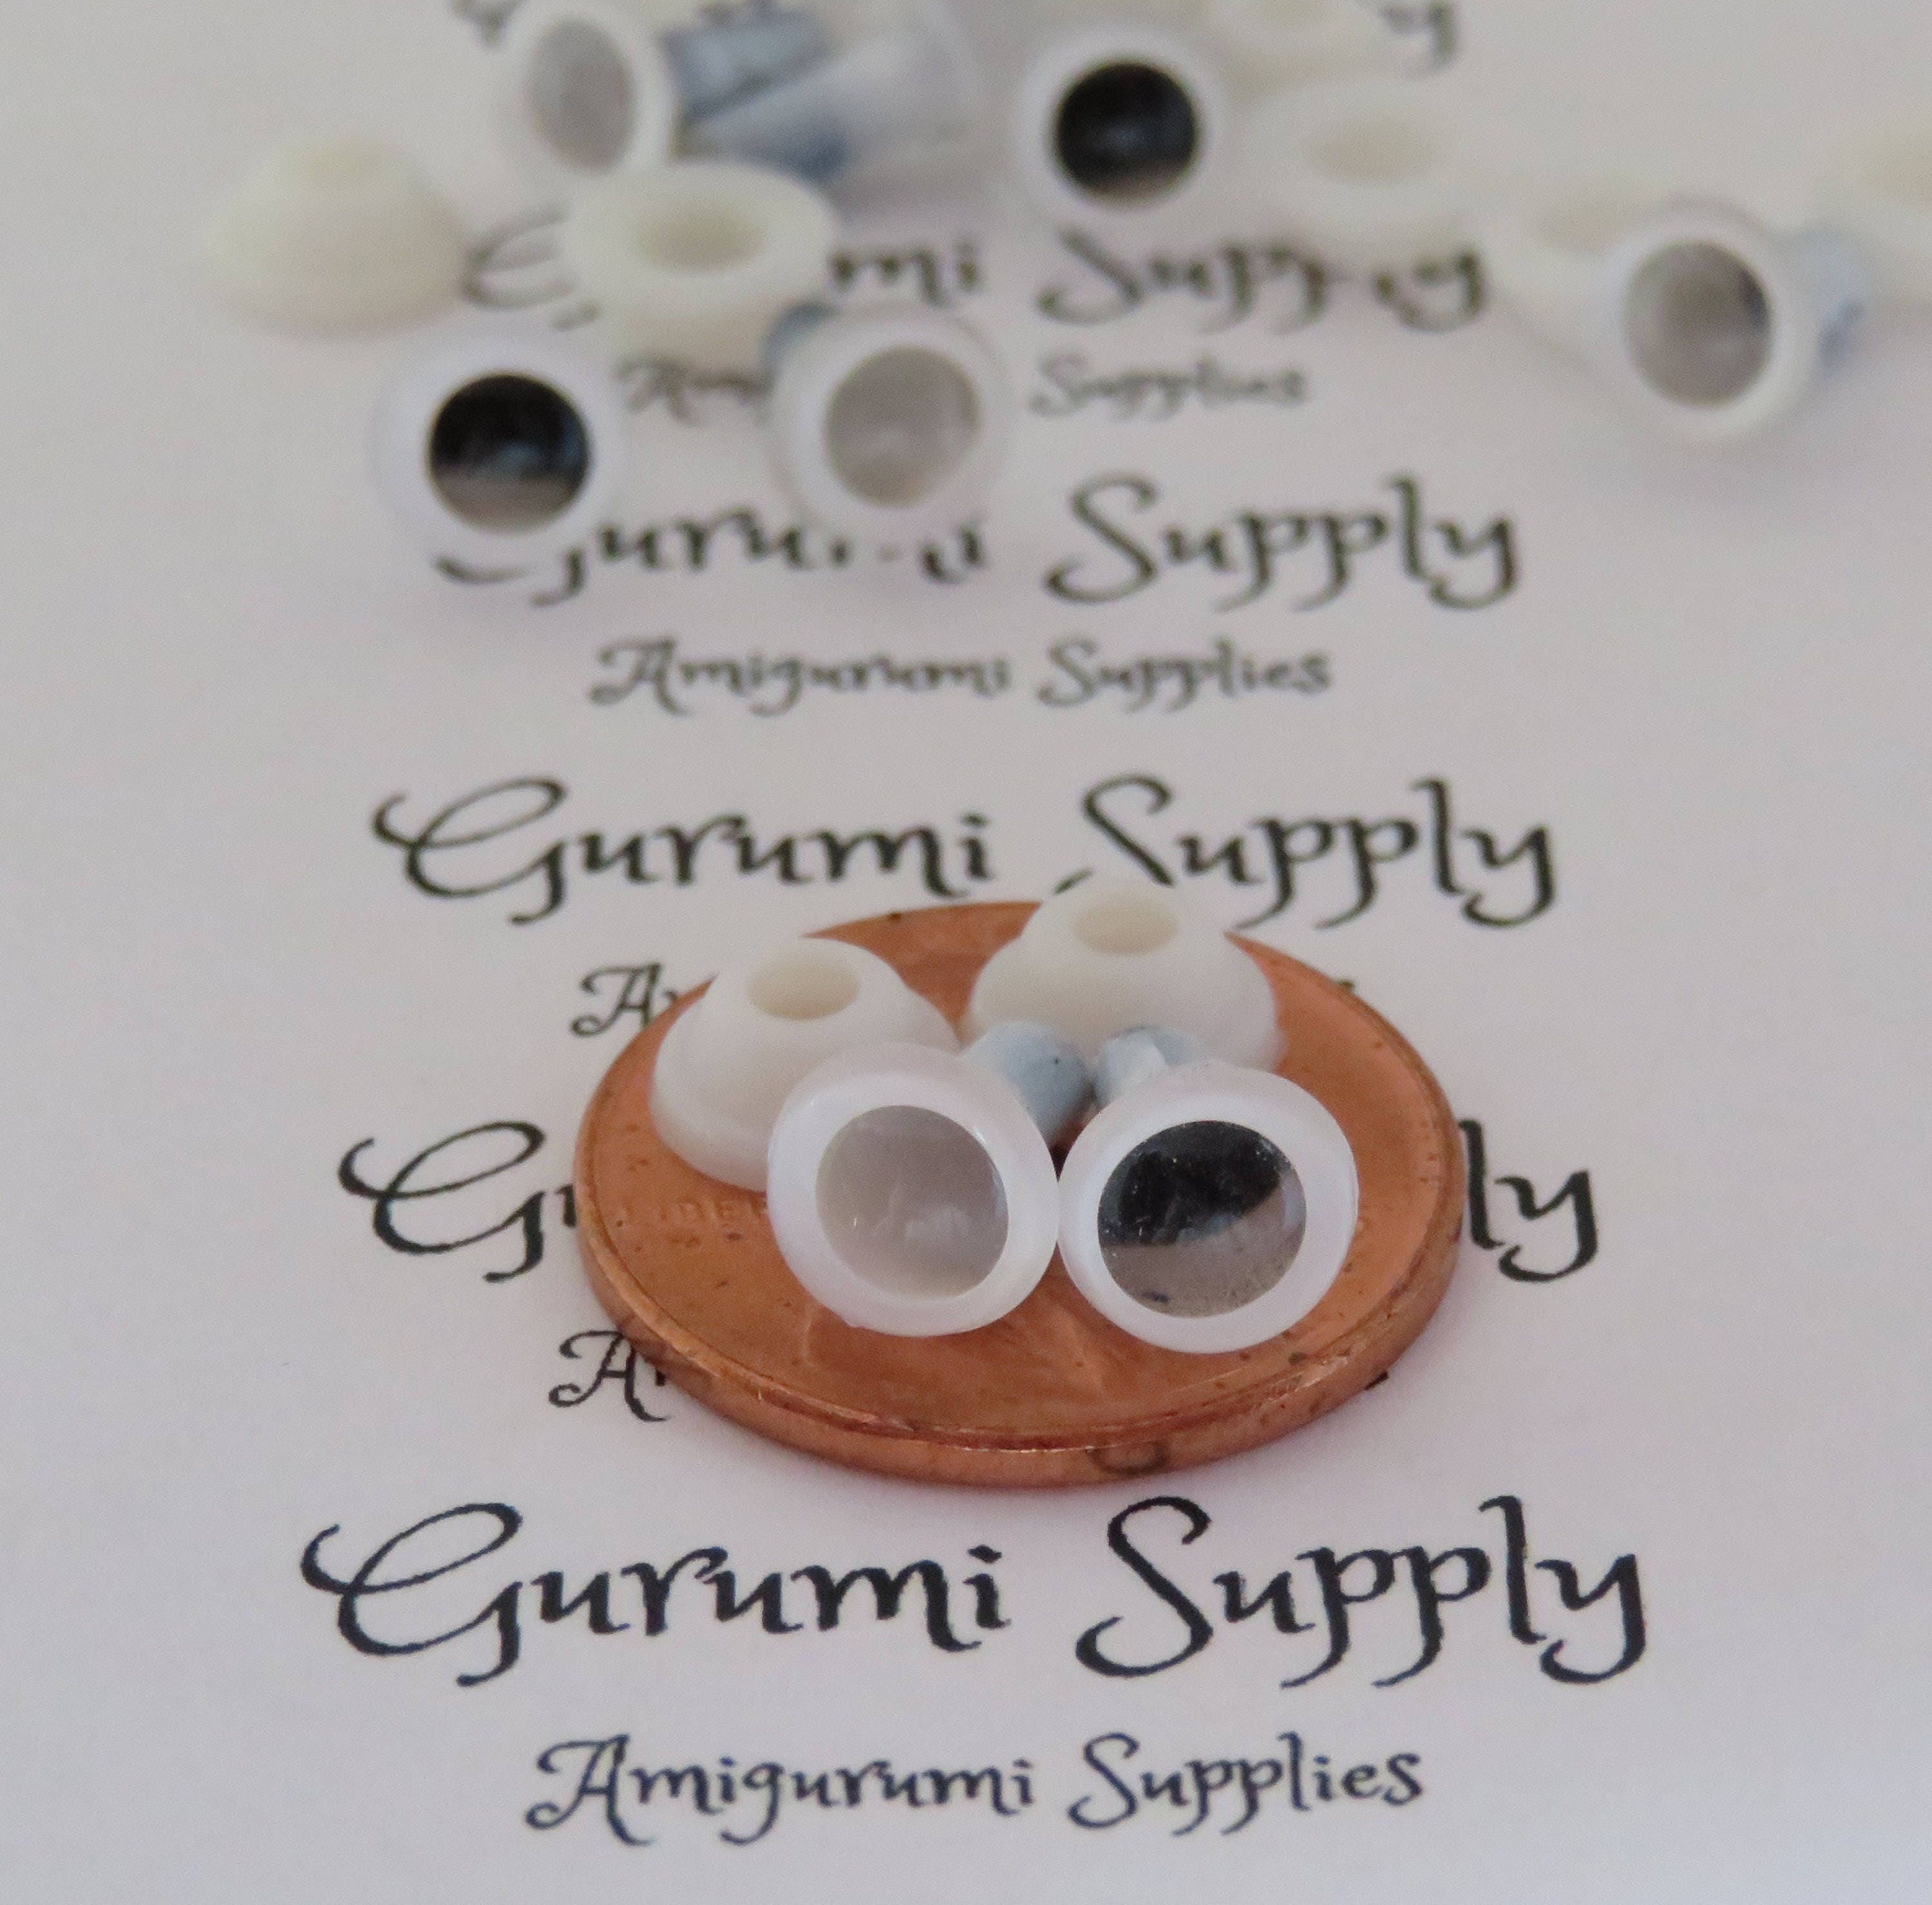 Buy 6mm White Color Round Craft Eyes With Black Pupils With Washers 5 Pairs  / Amigurumi / Dolls / Animals / Crafts / Safety Eyes / Toy / Crochet Online  in India 